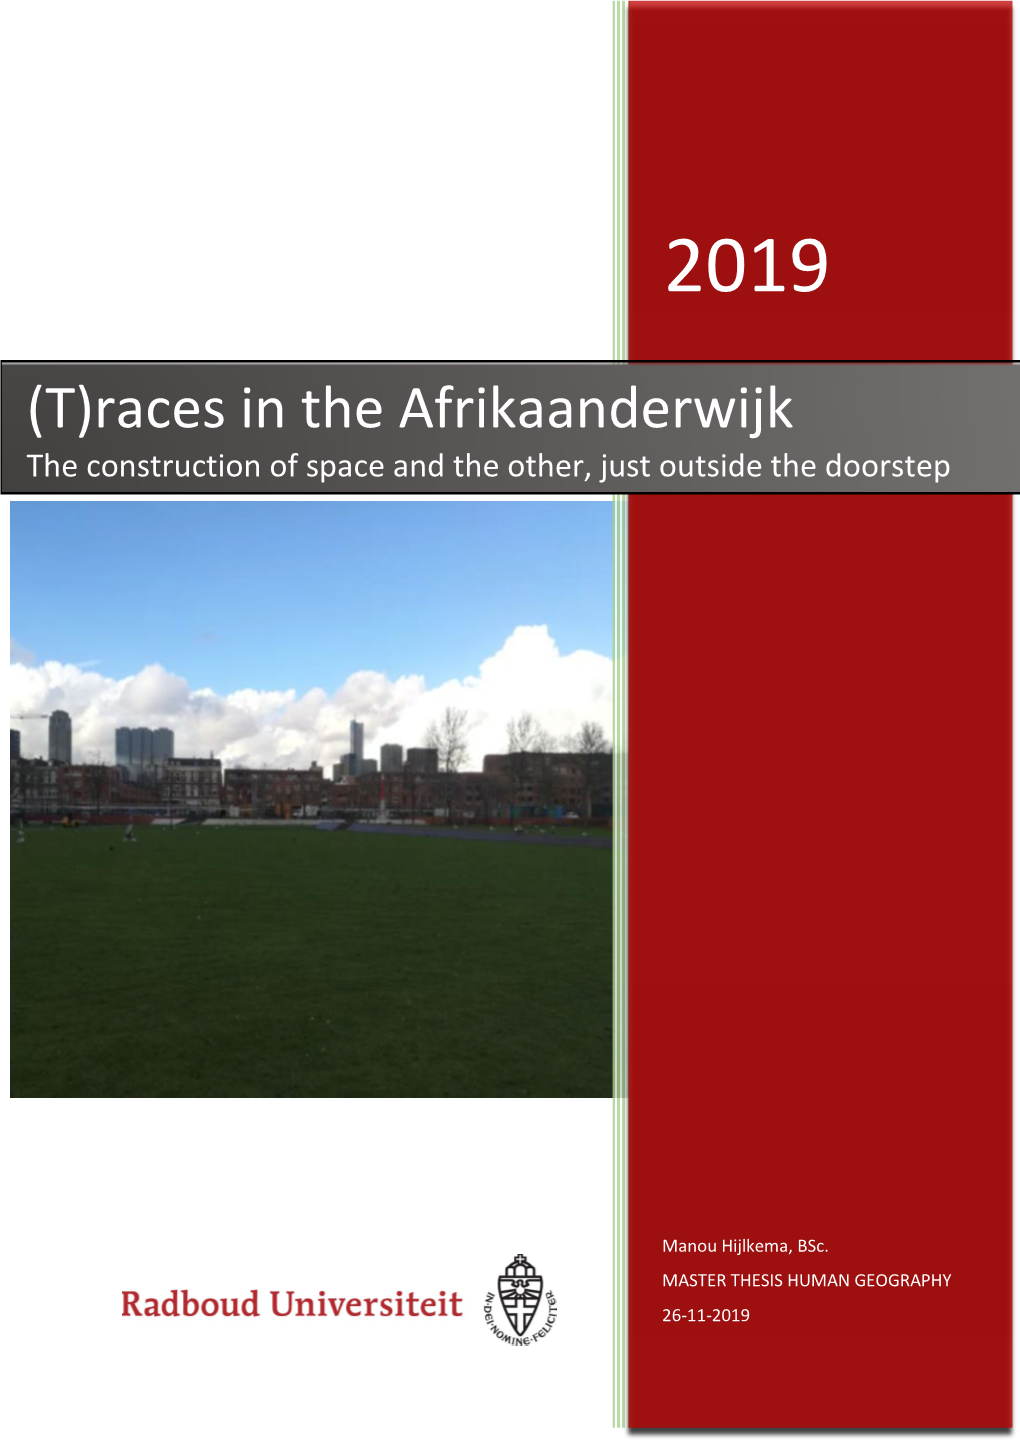 Races in the Afrikaanderwijk the Construction of Space and the Other, Just Outside the Doorstep